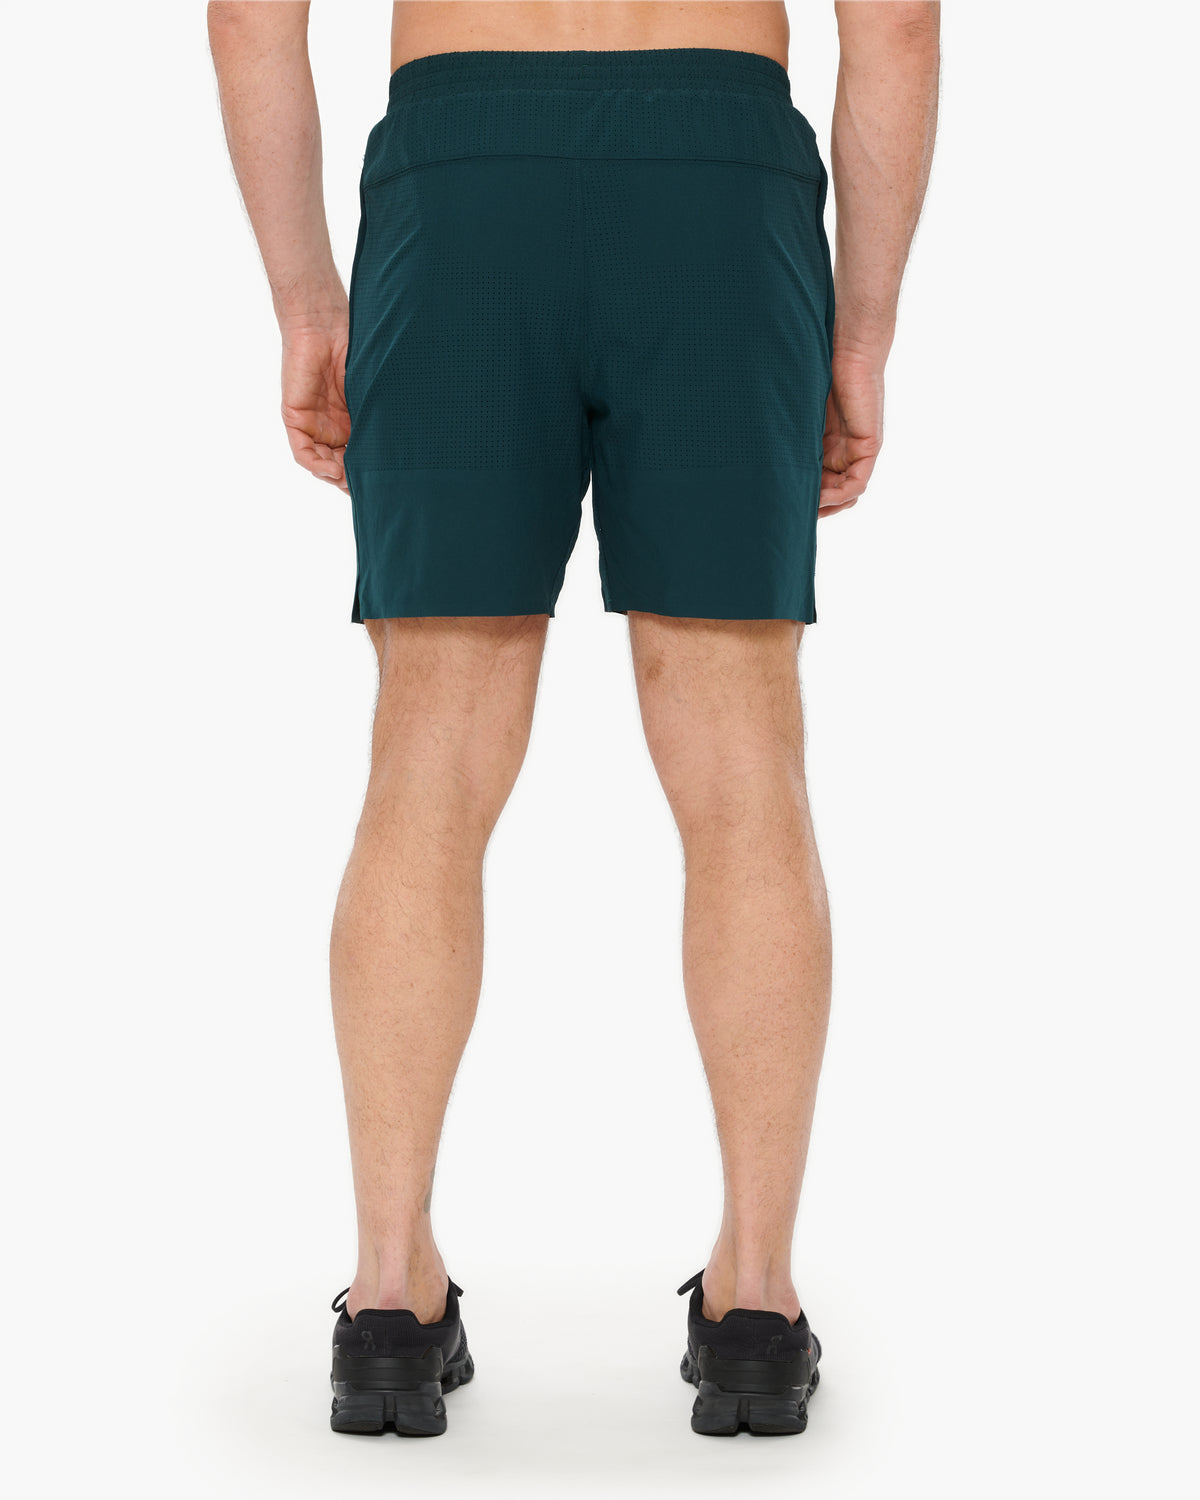 Alo Yoga Traction Short 7” - Lined